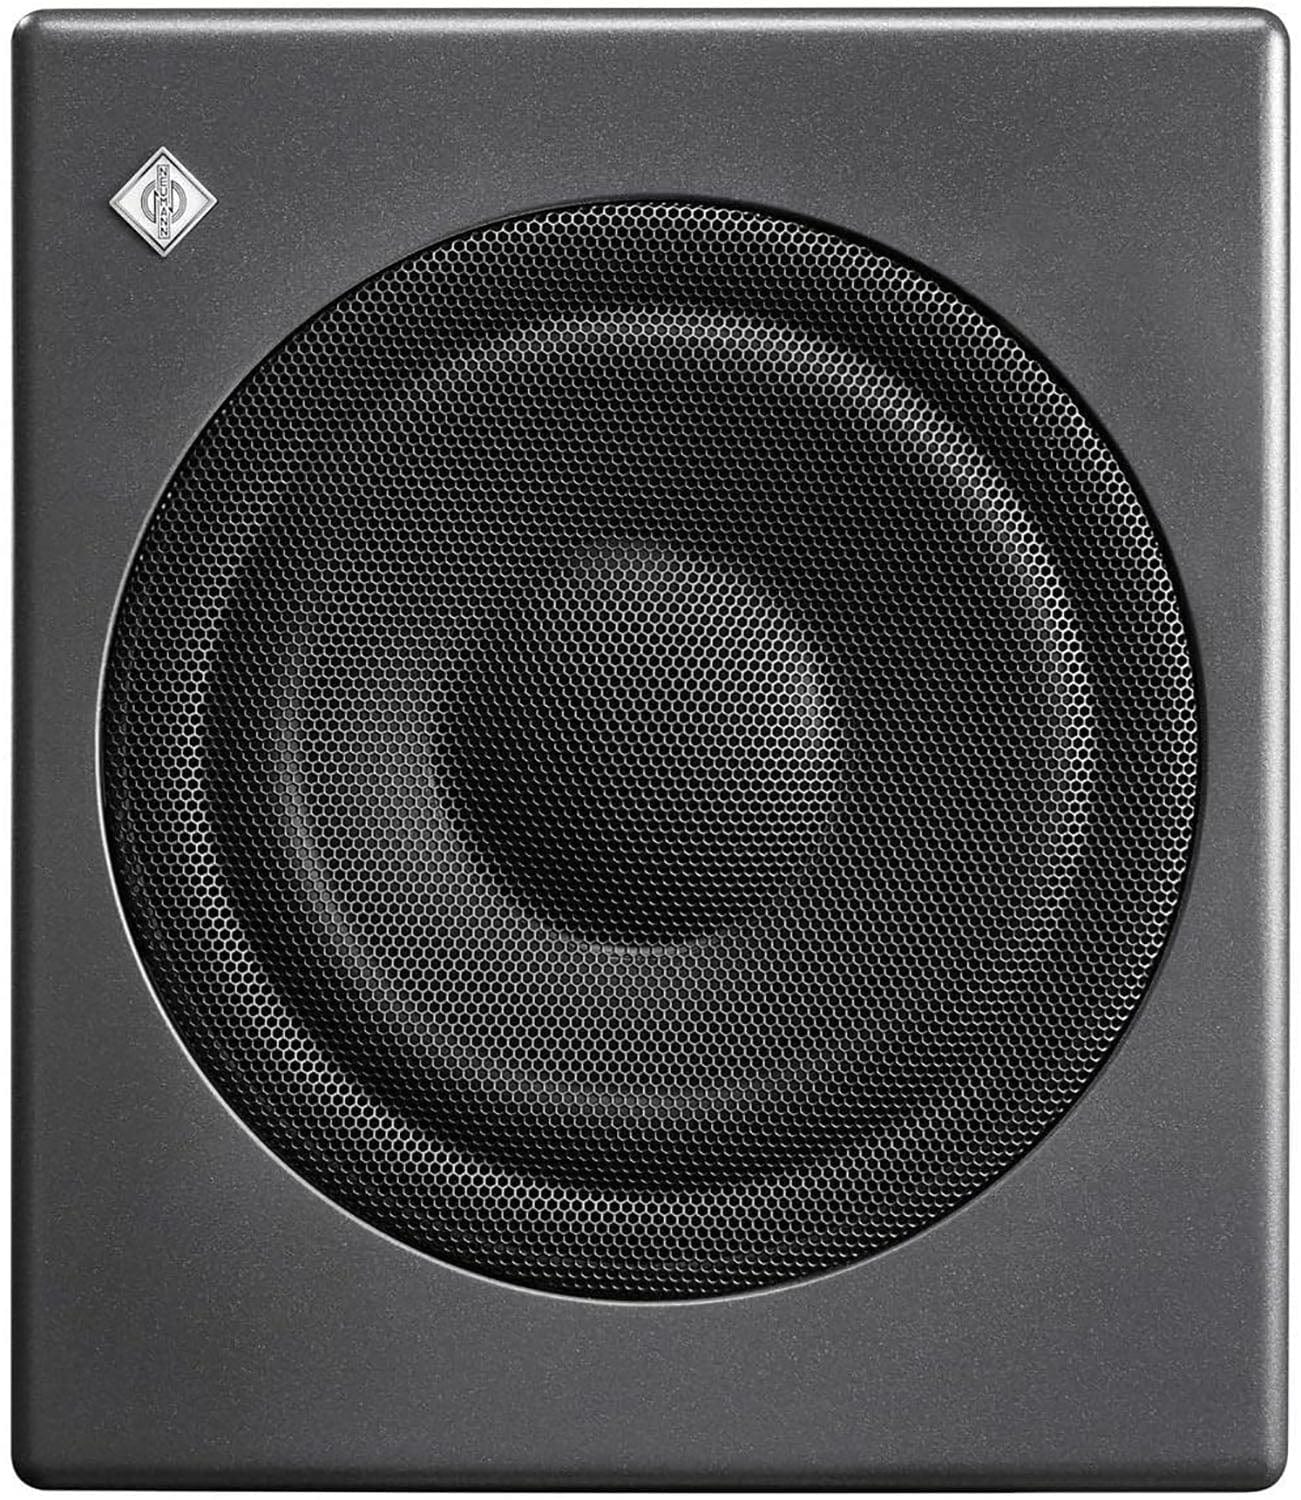 Neumann KH-750 Active DSP 10-Inch Subwoofer - PSSL ProSound and Stage Lighting